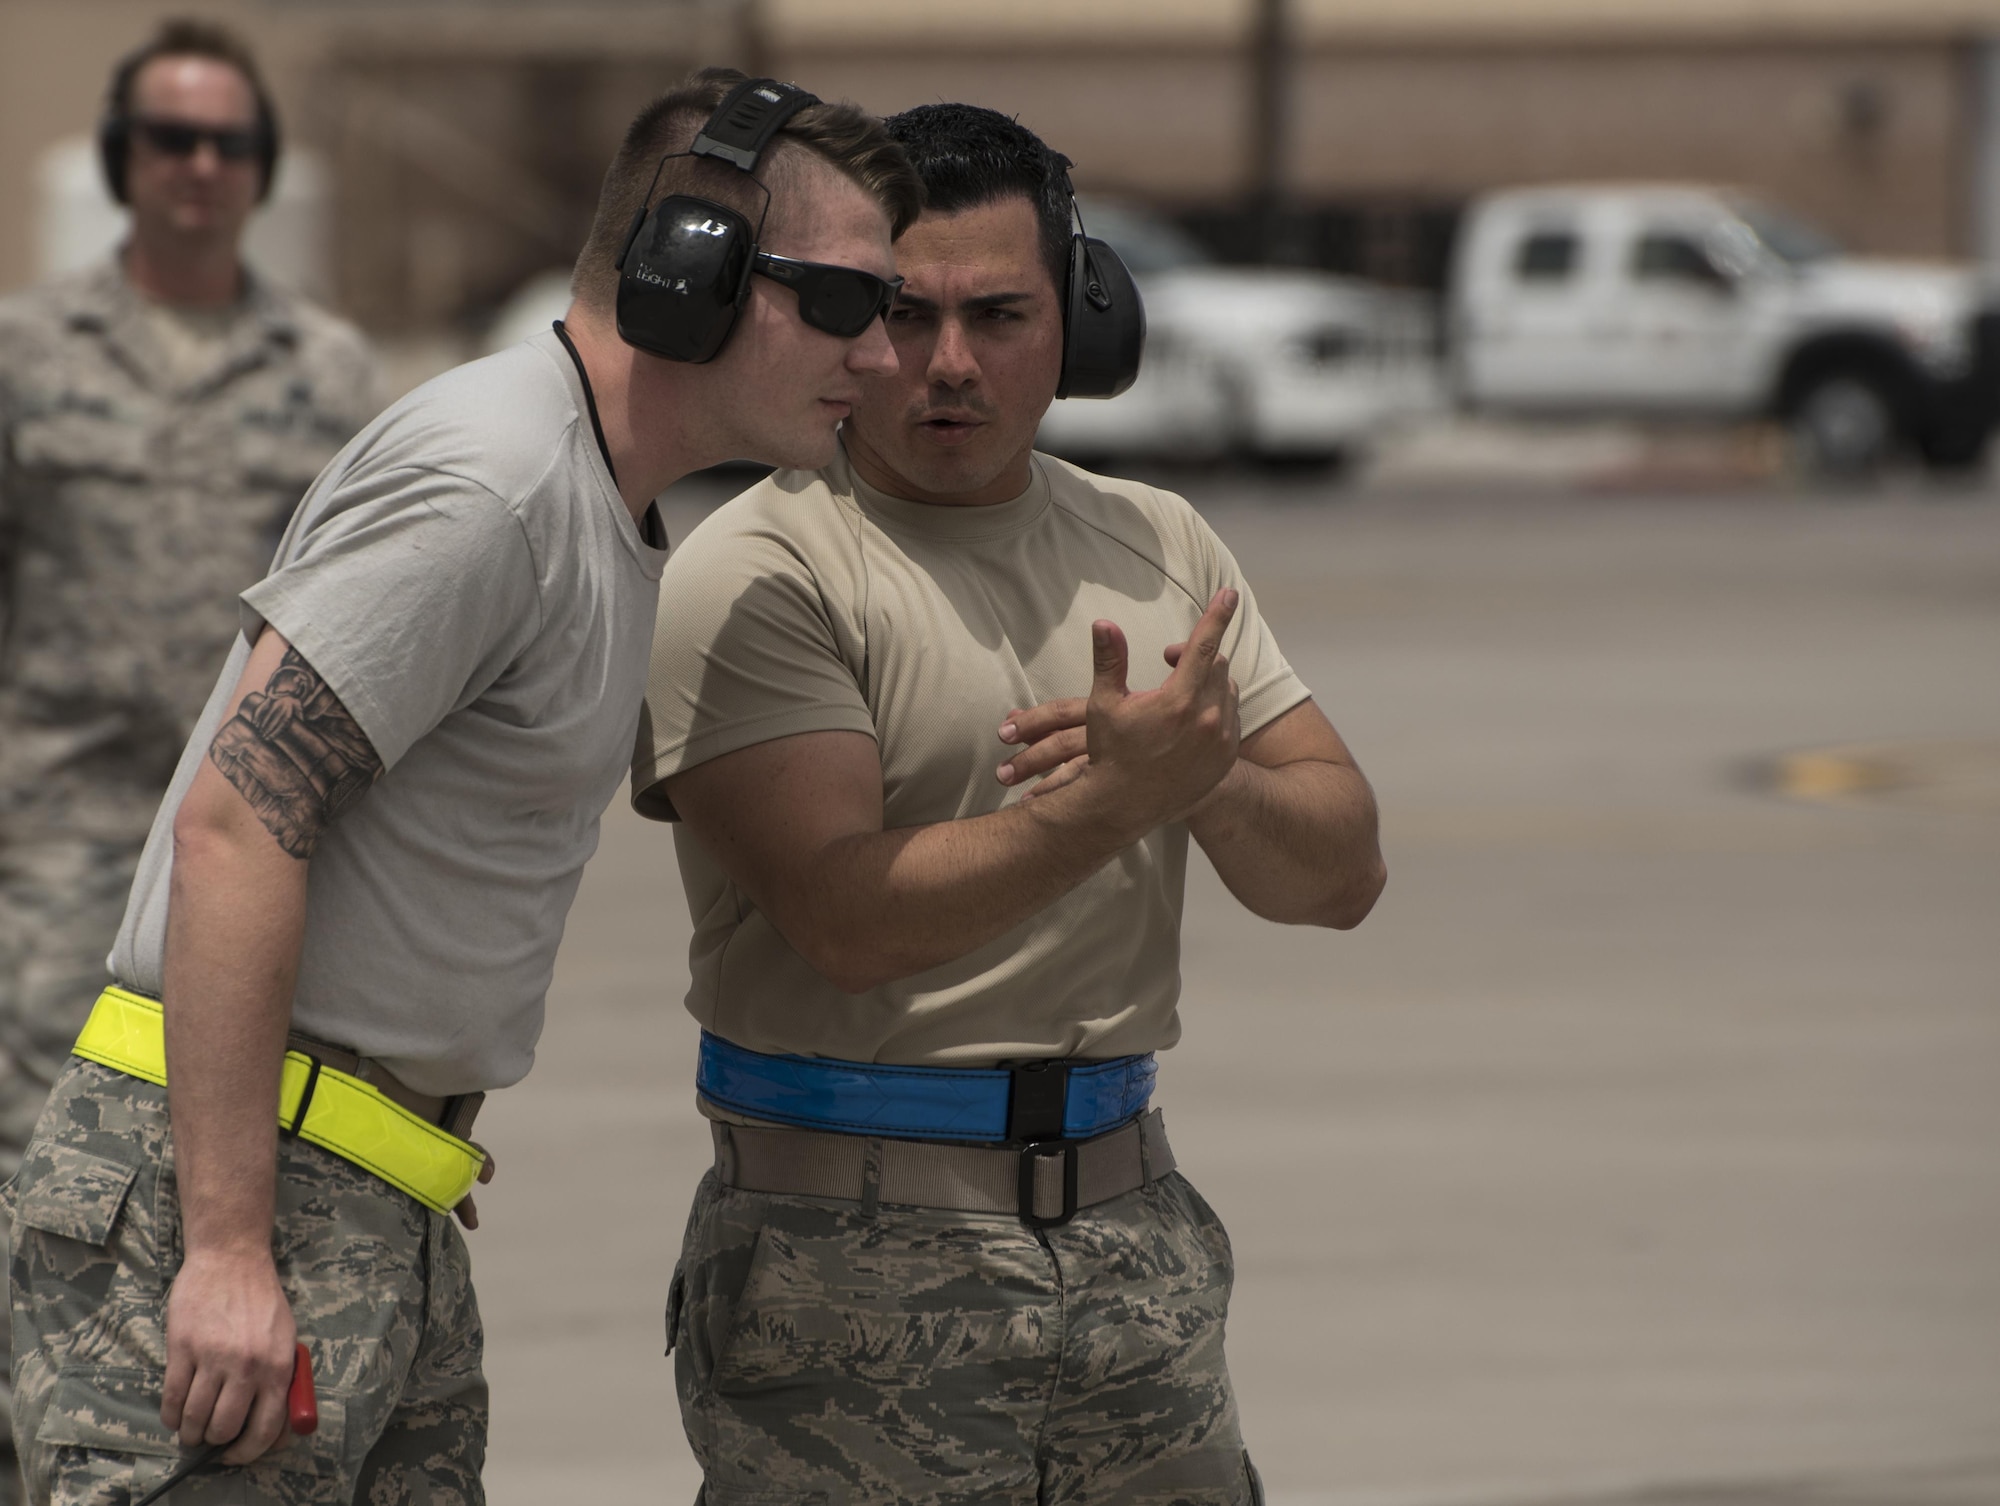 Staff Sgt. Marcos Cruz La Santa, right, 33rd Aircraft Maintenance Squadron avionics systems technician, trains an Airman pre-flight July 18, 2017, at Nellis Air Force Base, Nev. As one of the first core trained F-35 noncommissioned officers, Cruz has the unique perspective of working with fourth-generation maintainers while being able to connect with fifth-generation maintainers who have come through the training pipeline. (U.S. Air Force photo by Staff Sgt. Peter Thompson)